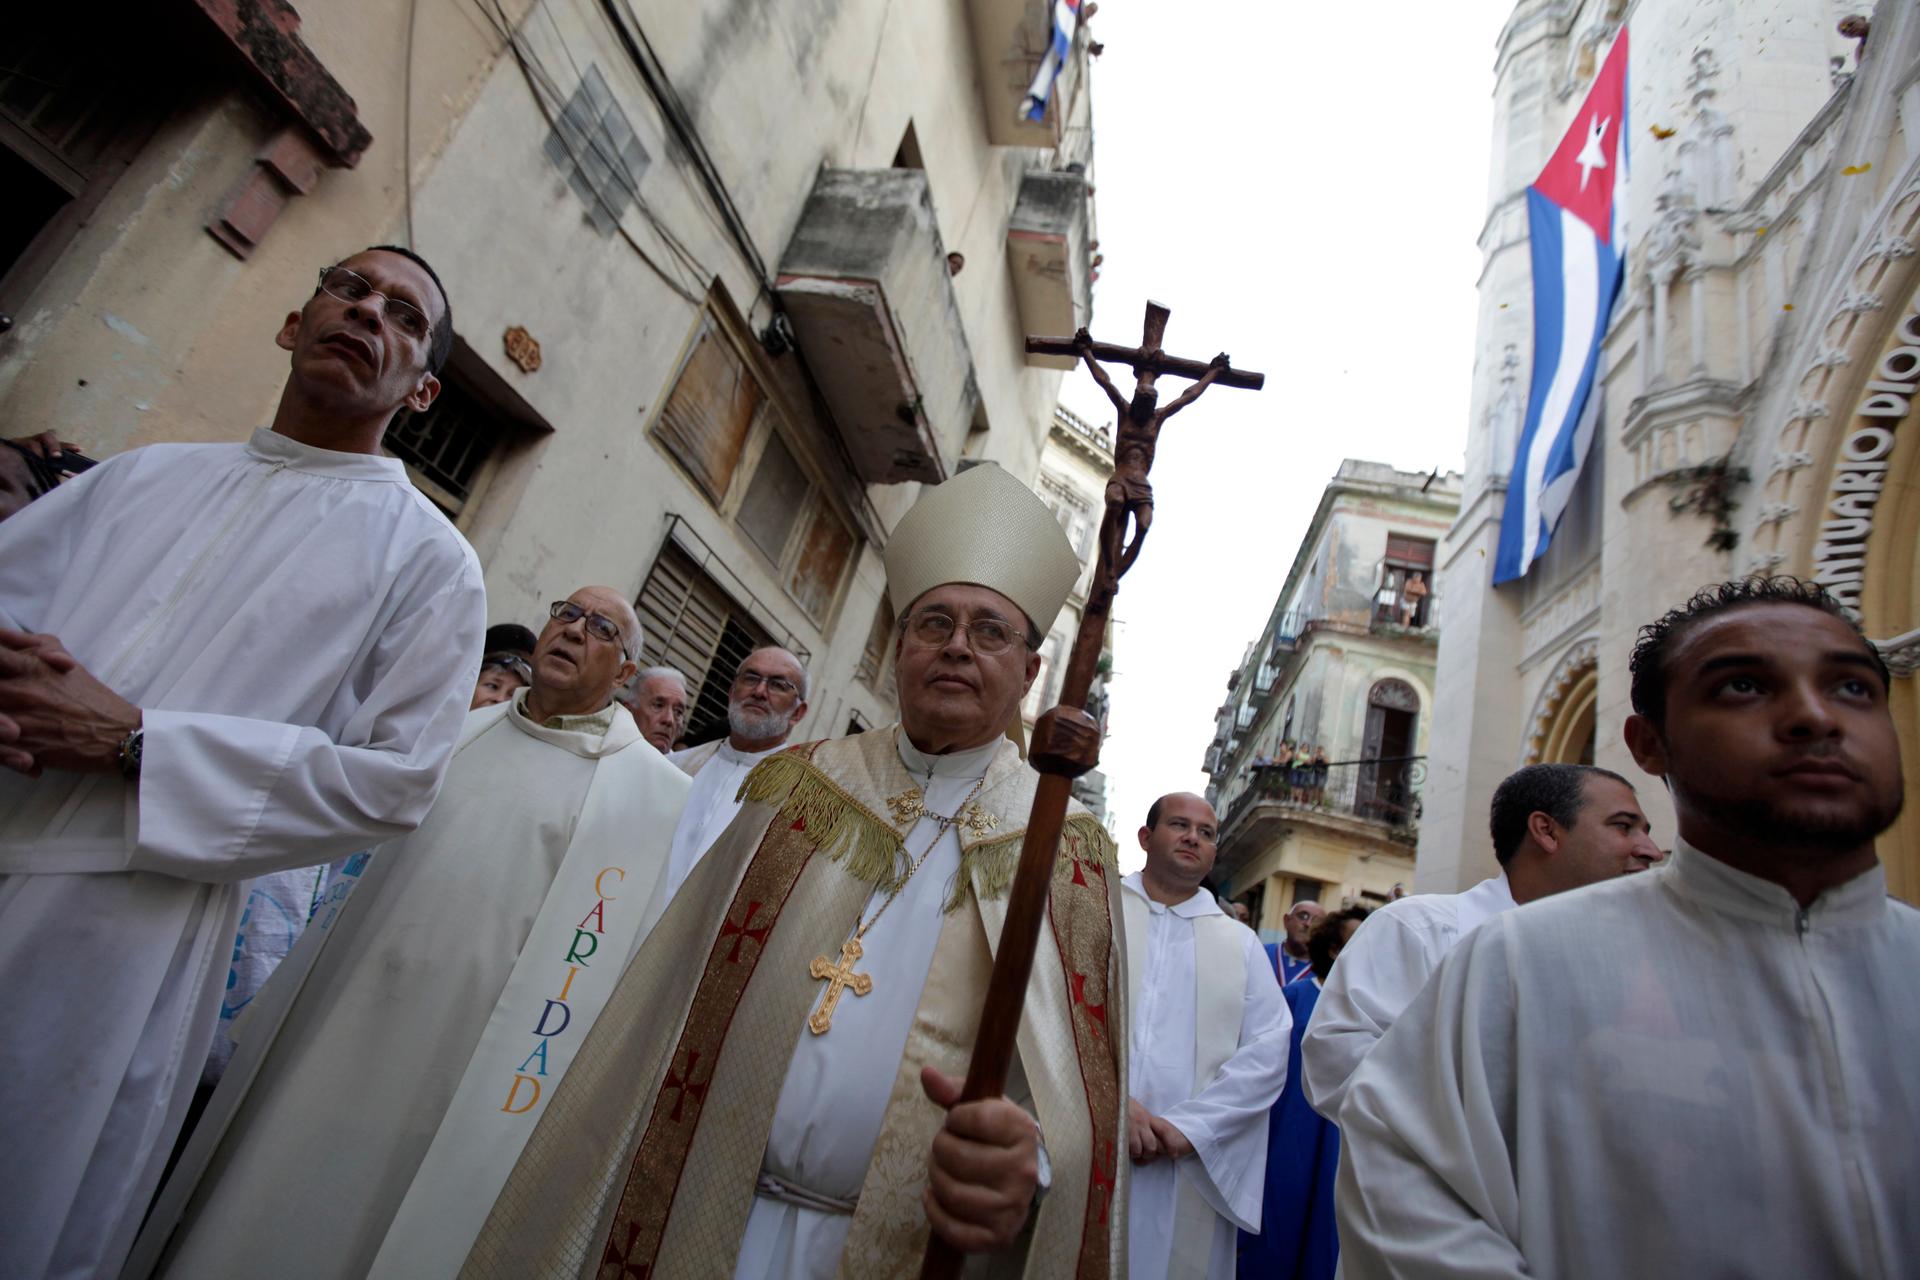 The annual procession of Our Lady of Charity, the patron saint of Cuba in Havana.